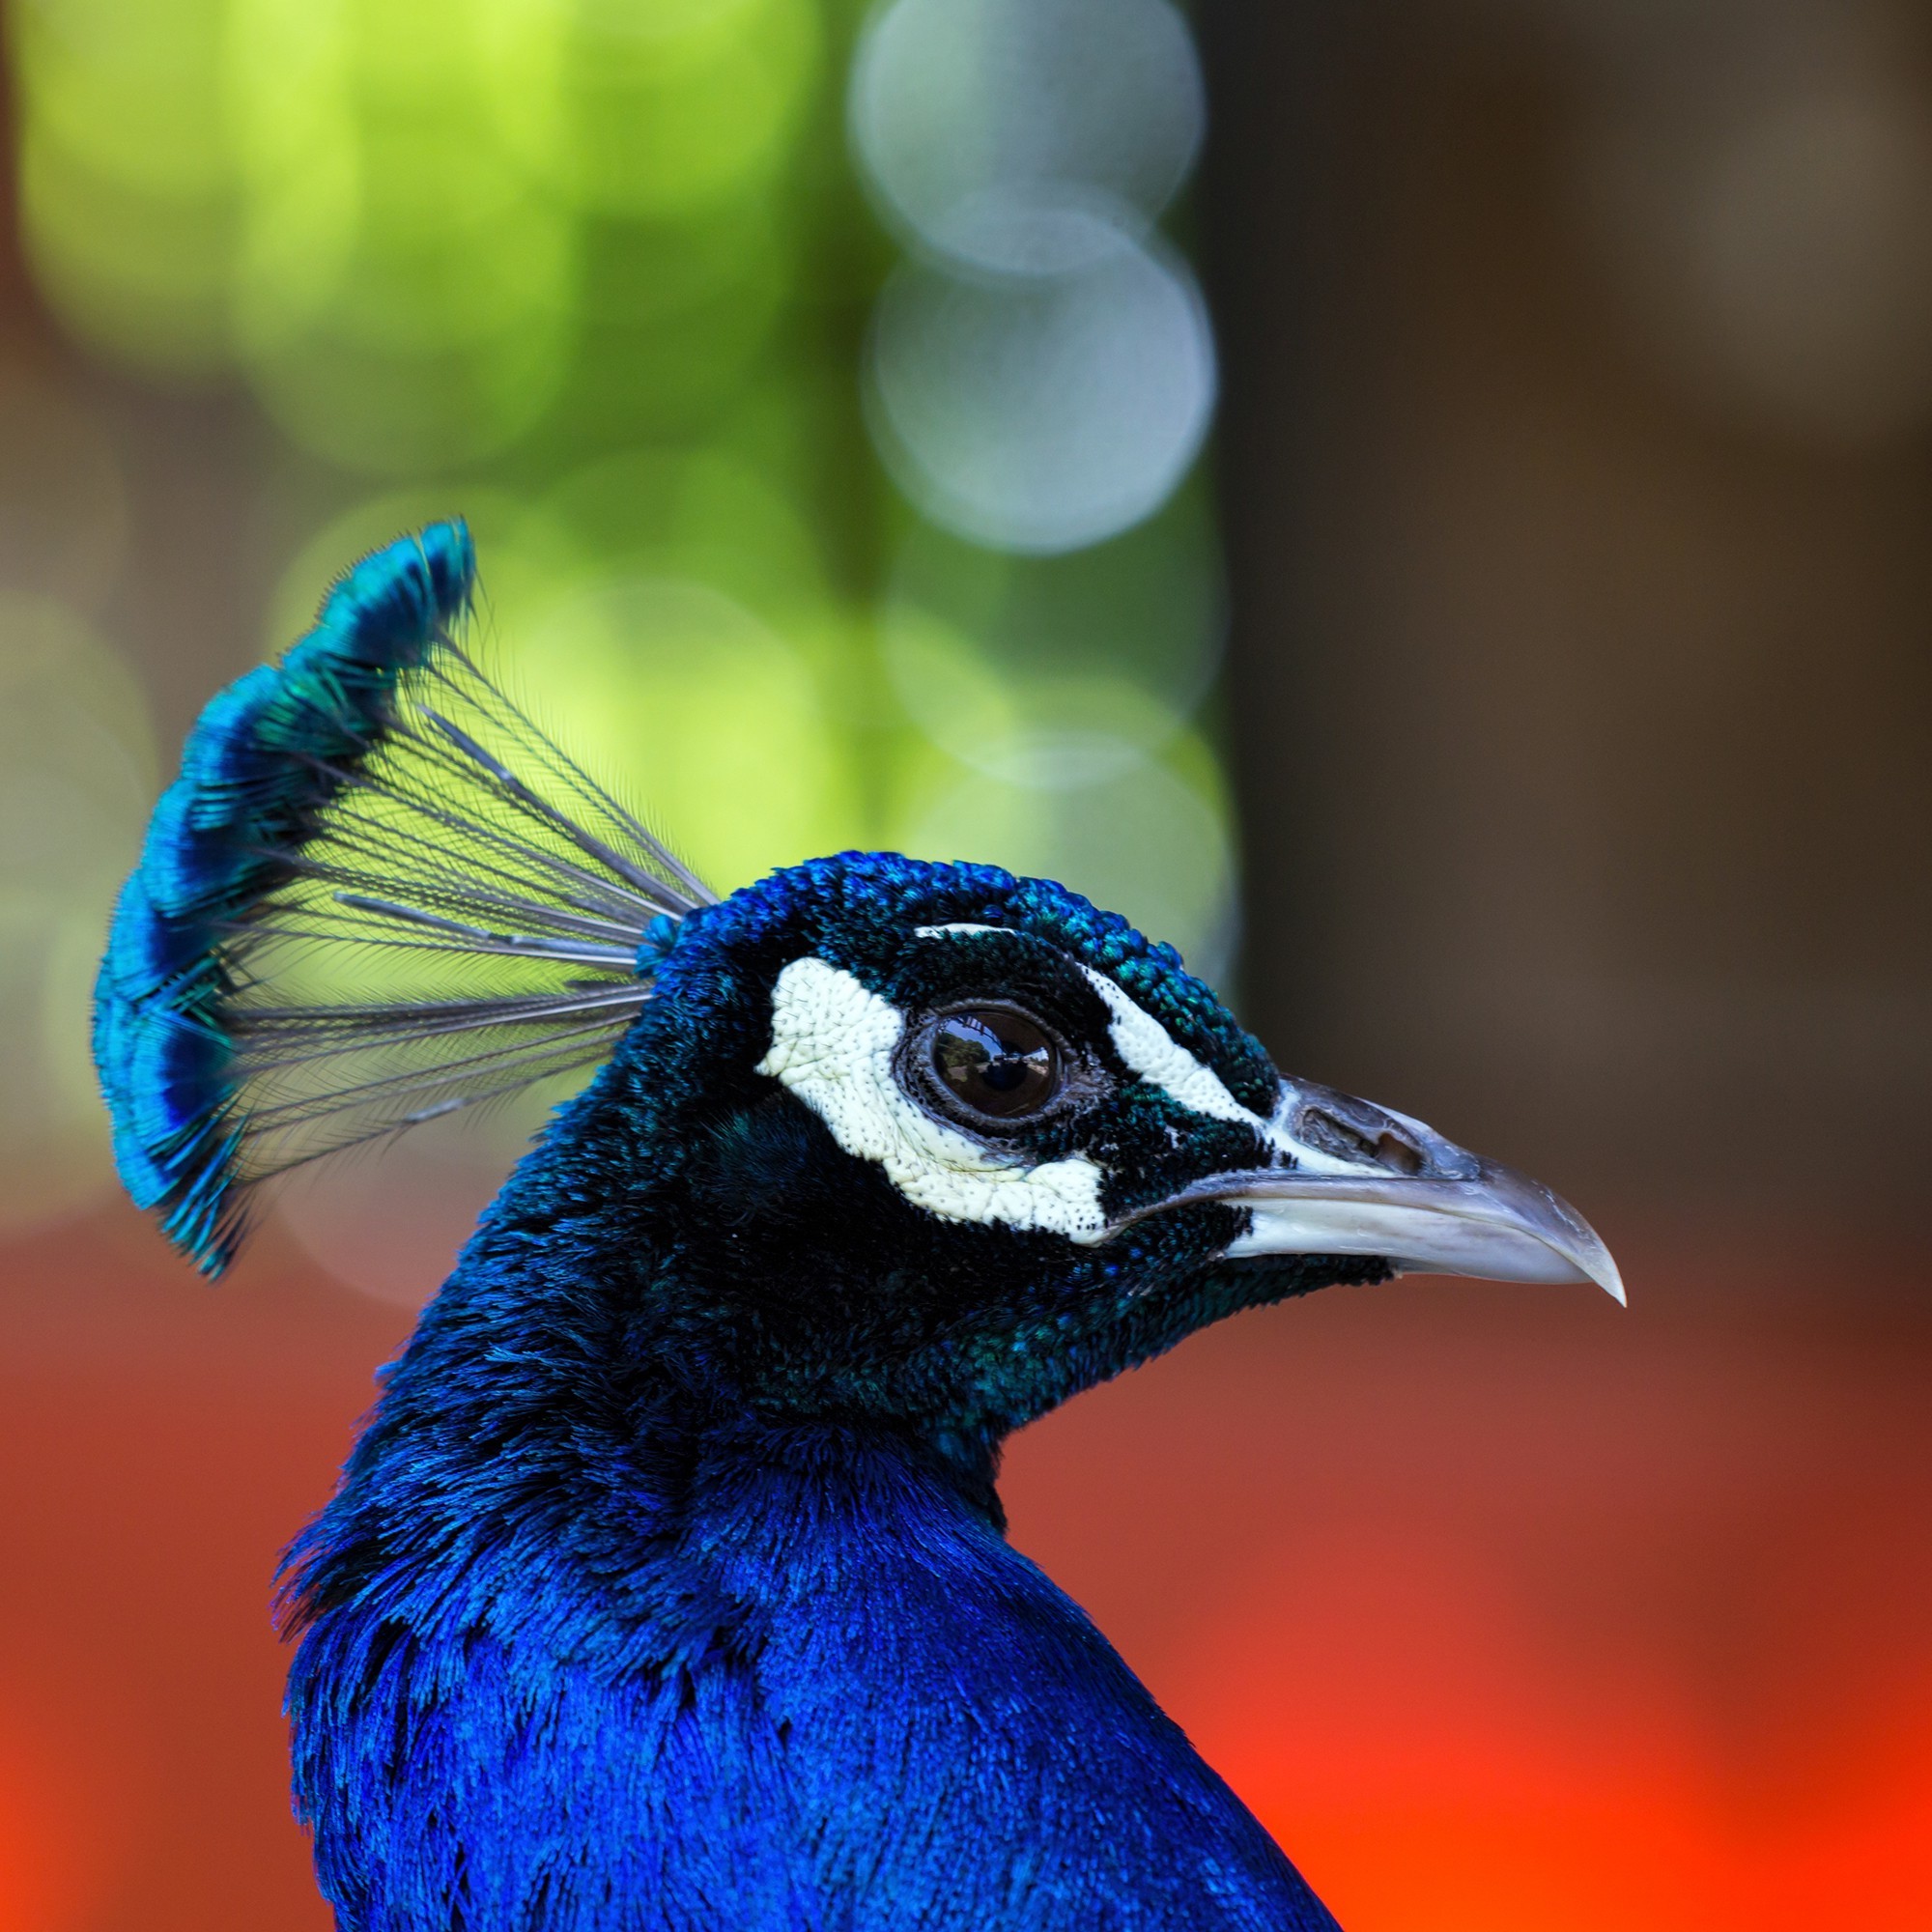 face eyes photography nature peacocks birds colorful wildlife Wallpaper